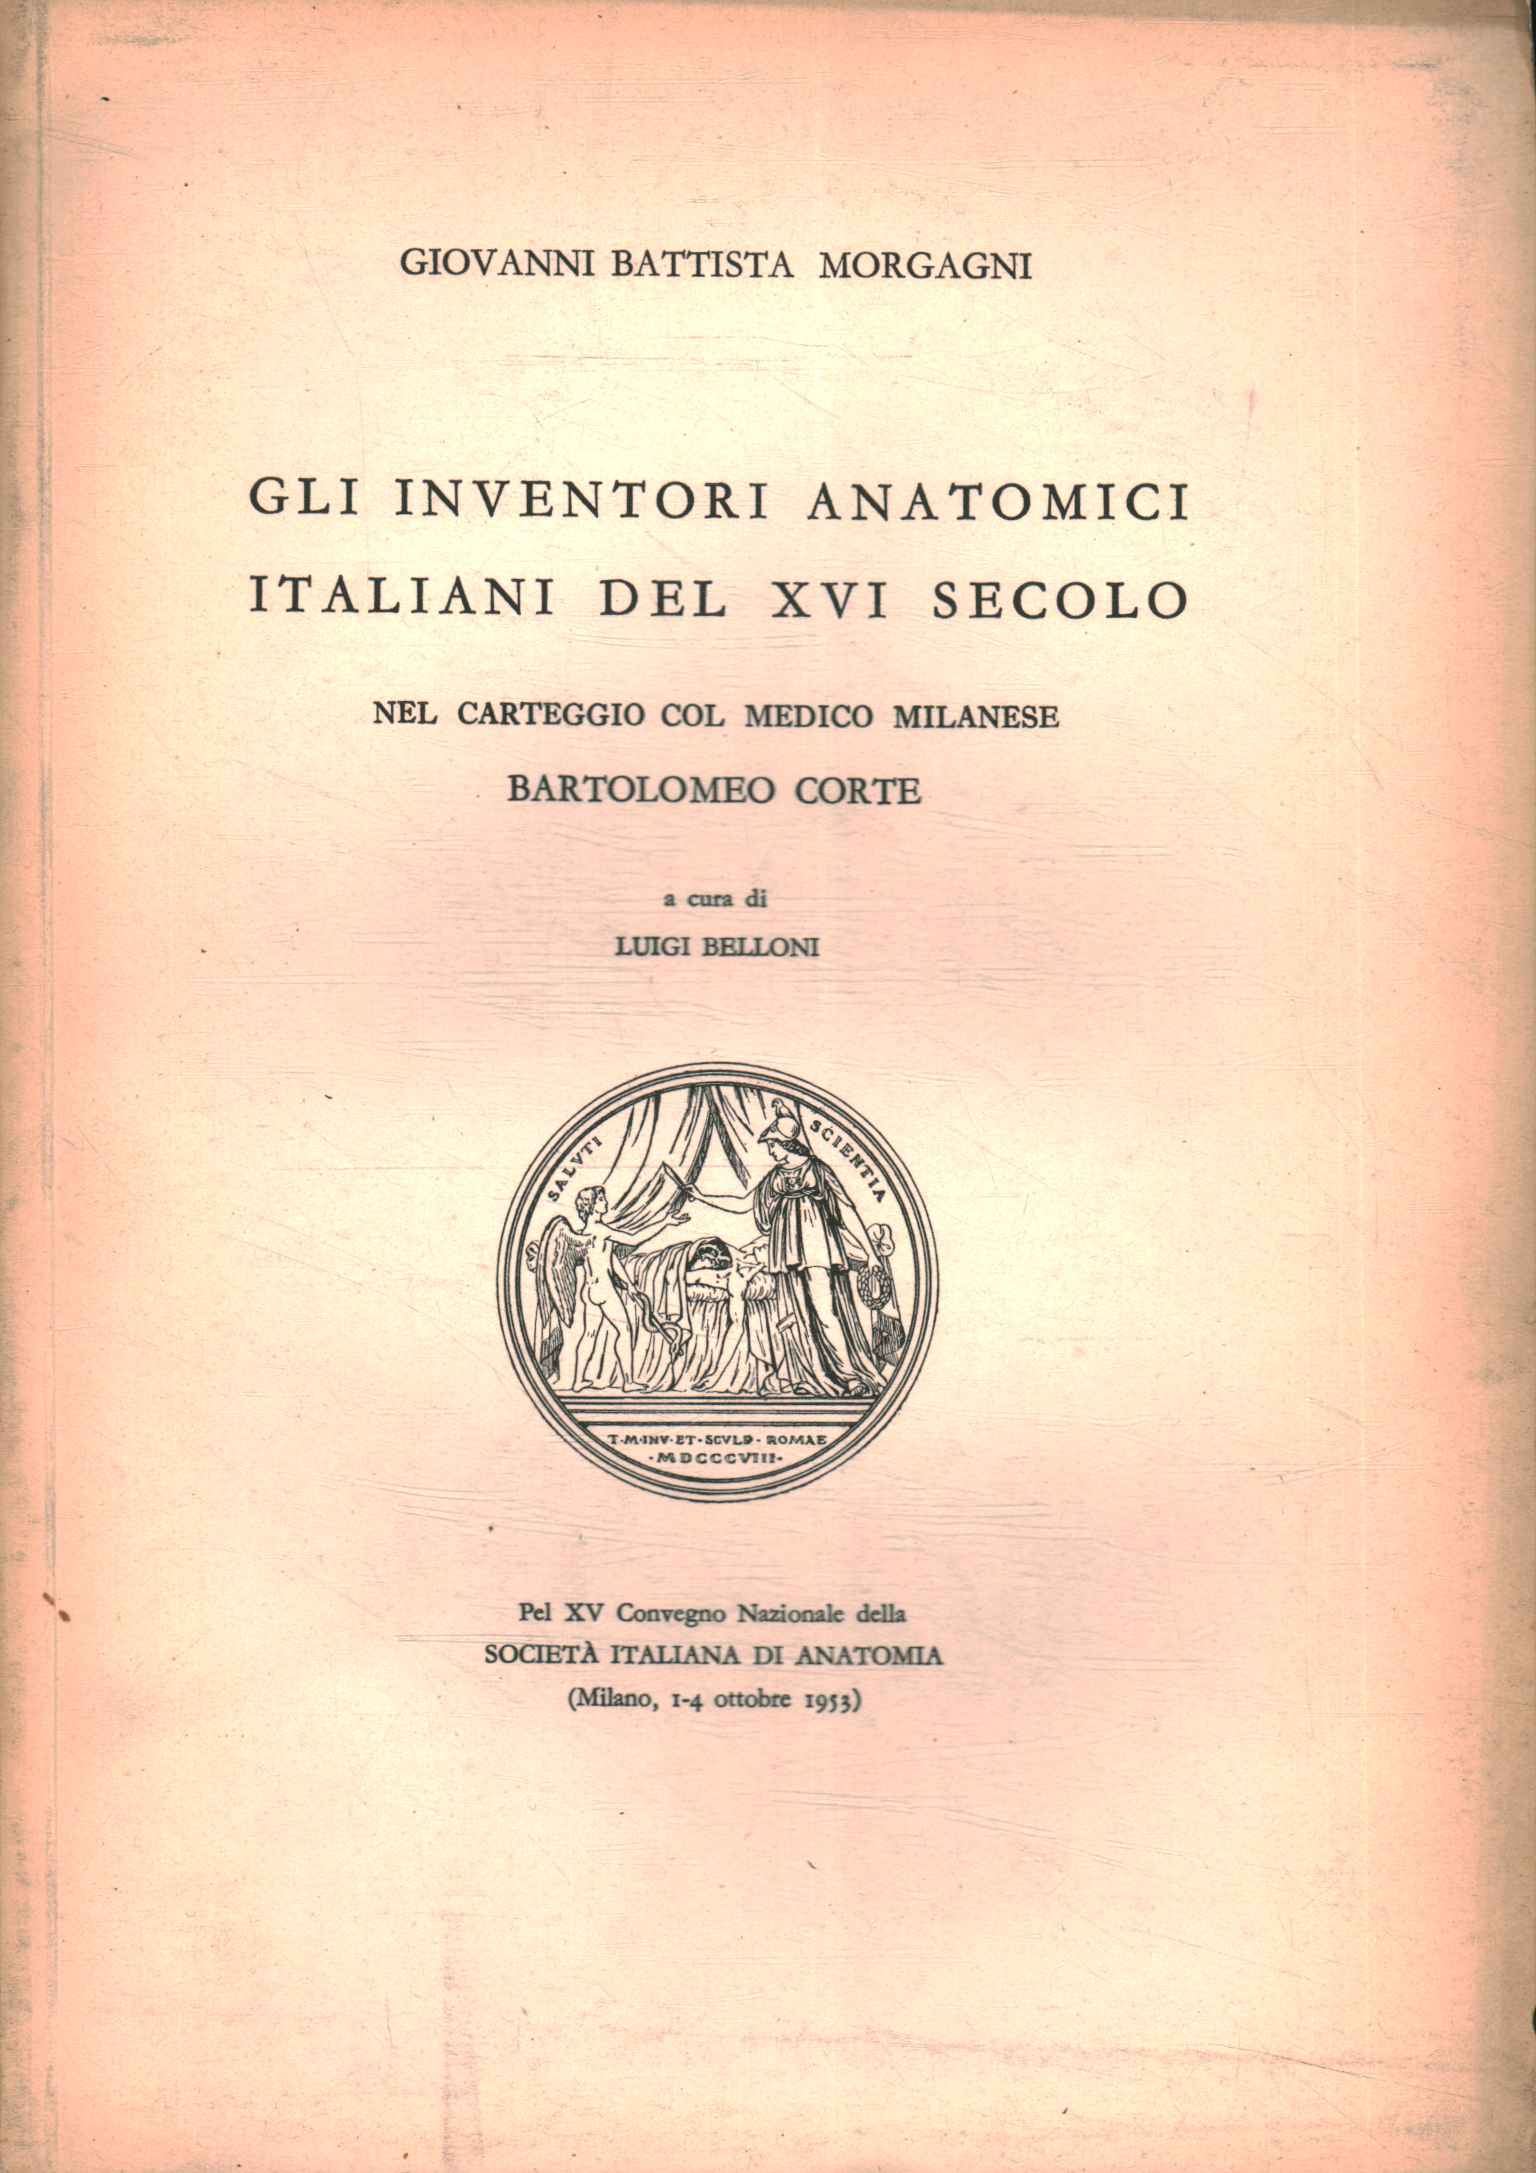 The Italian anatomical inventors of the XVI